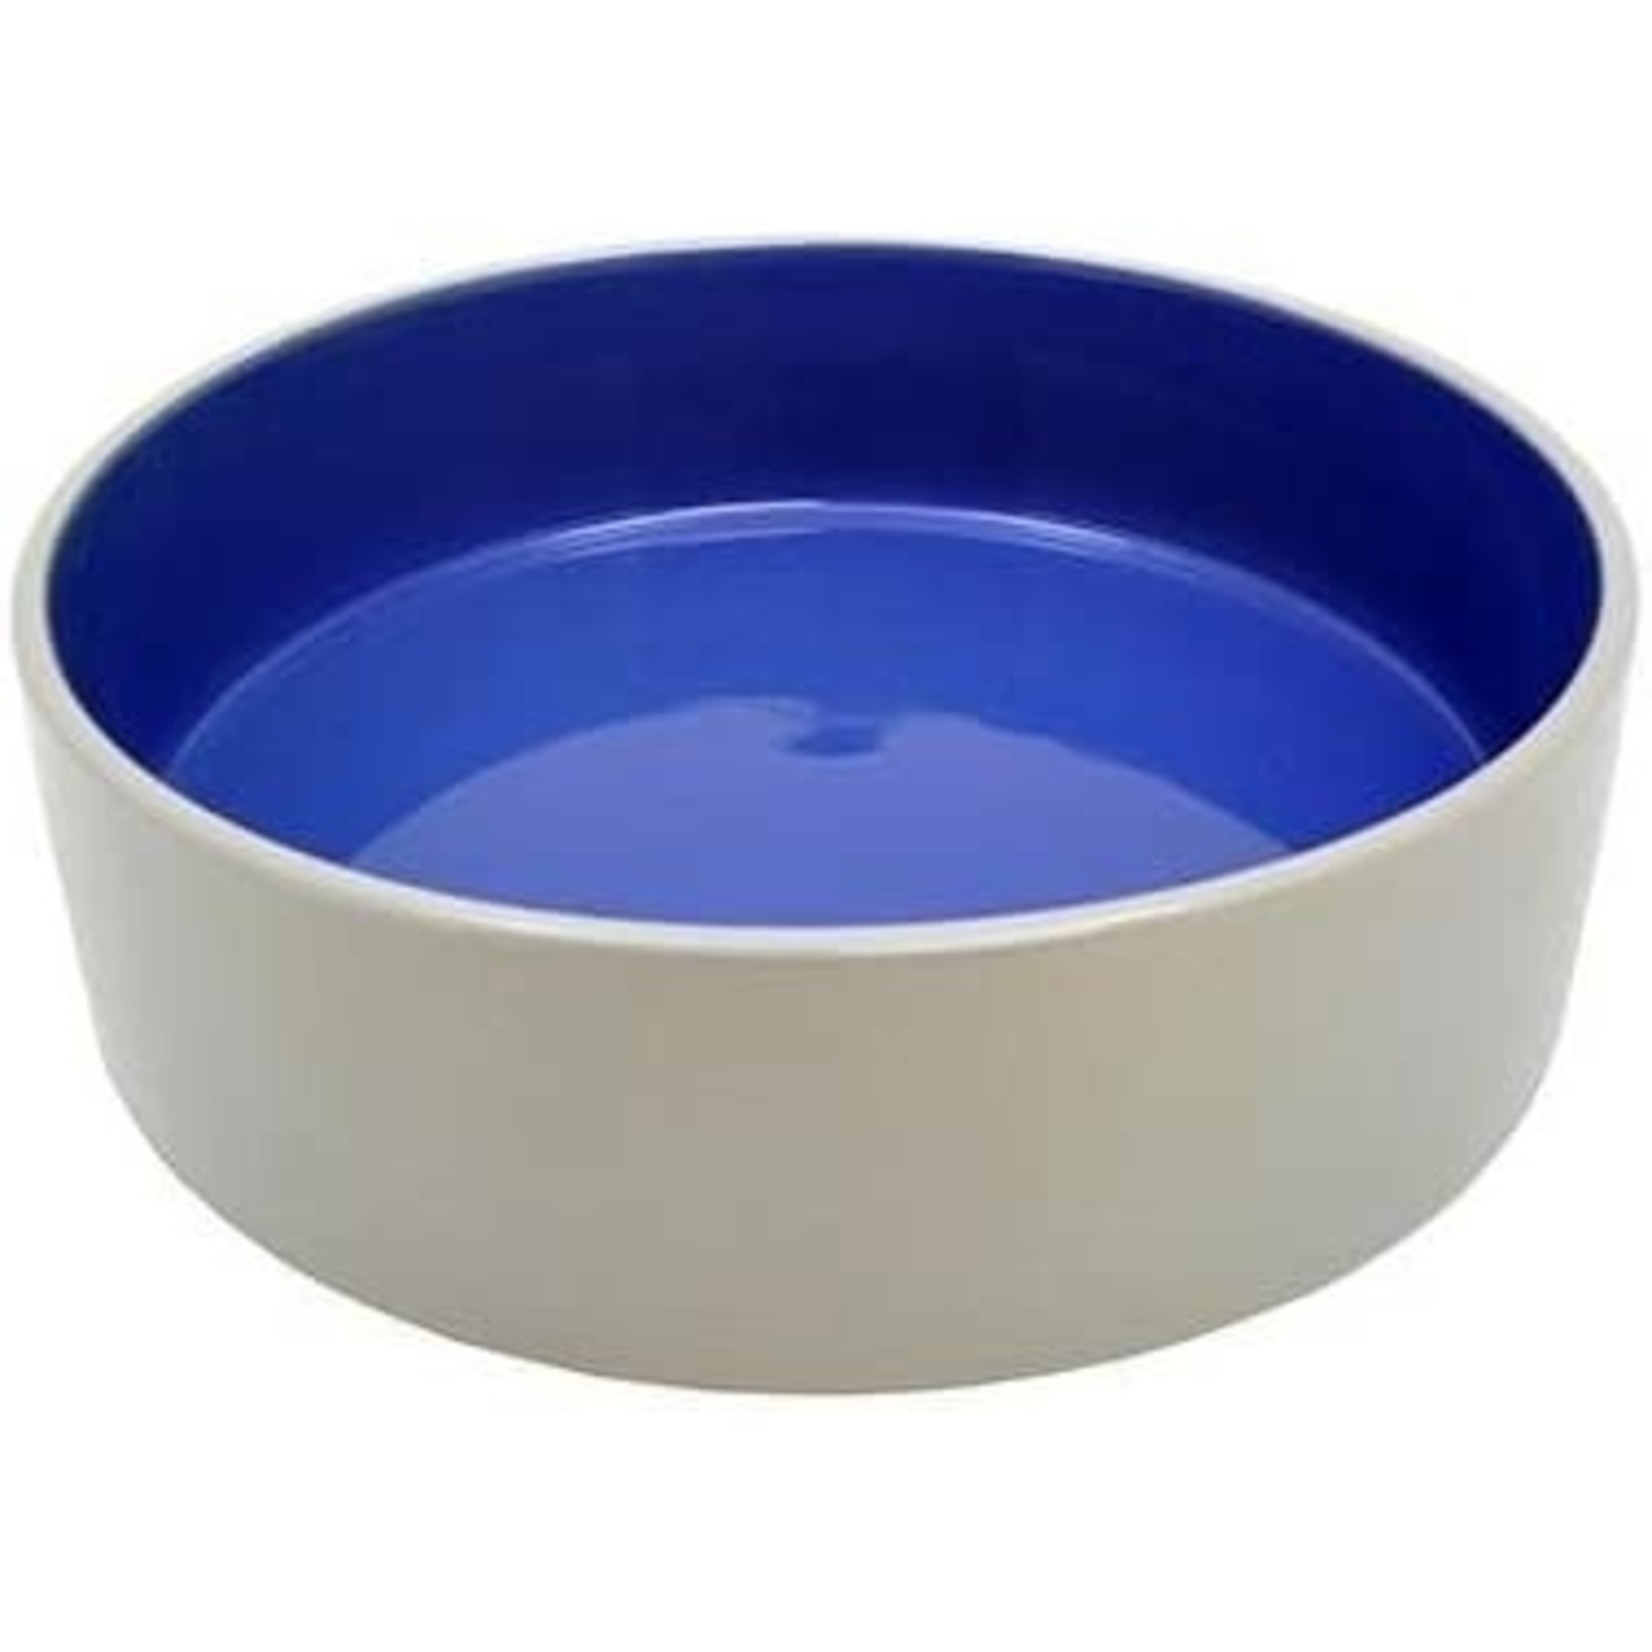 Ethical Pet / Spot Ethical Pet Gray & Blue Stoneware Crock Dog Food Water Dish